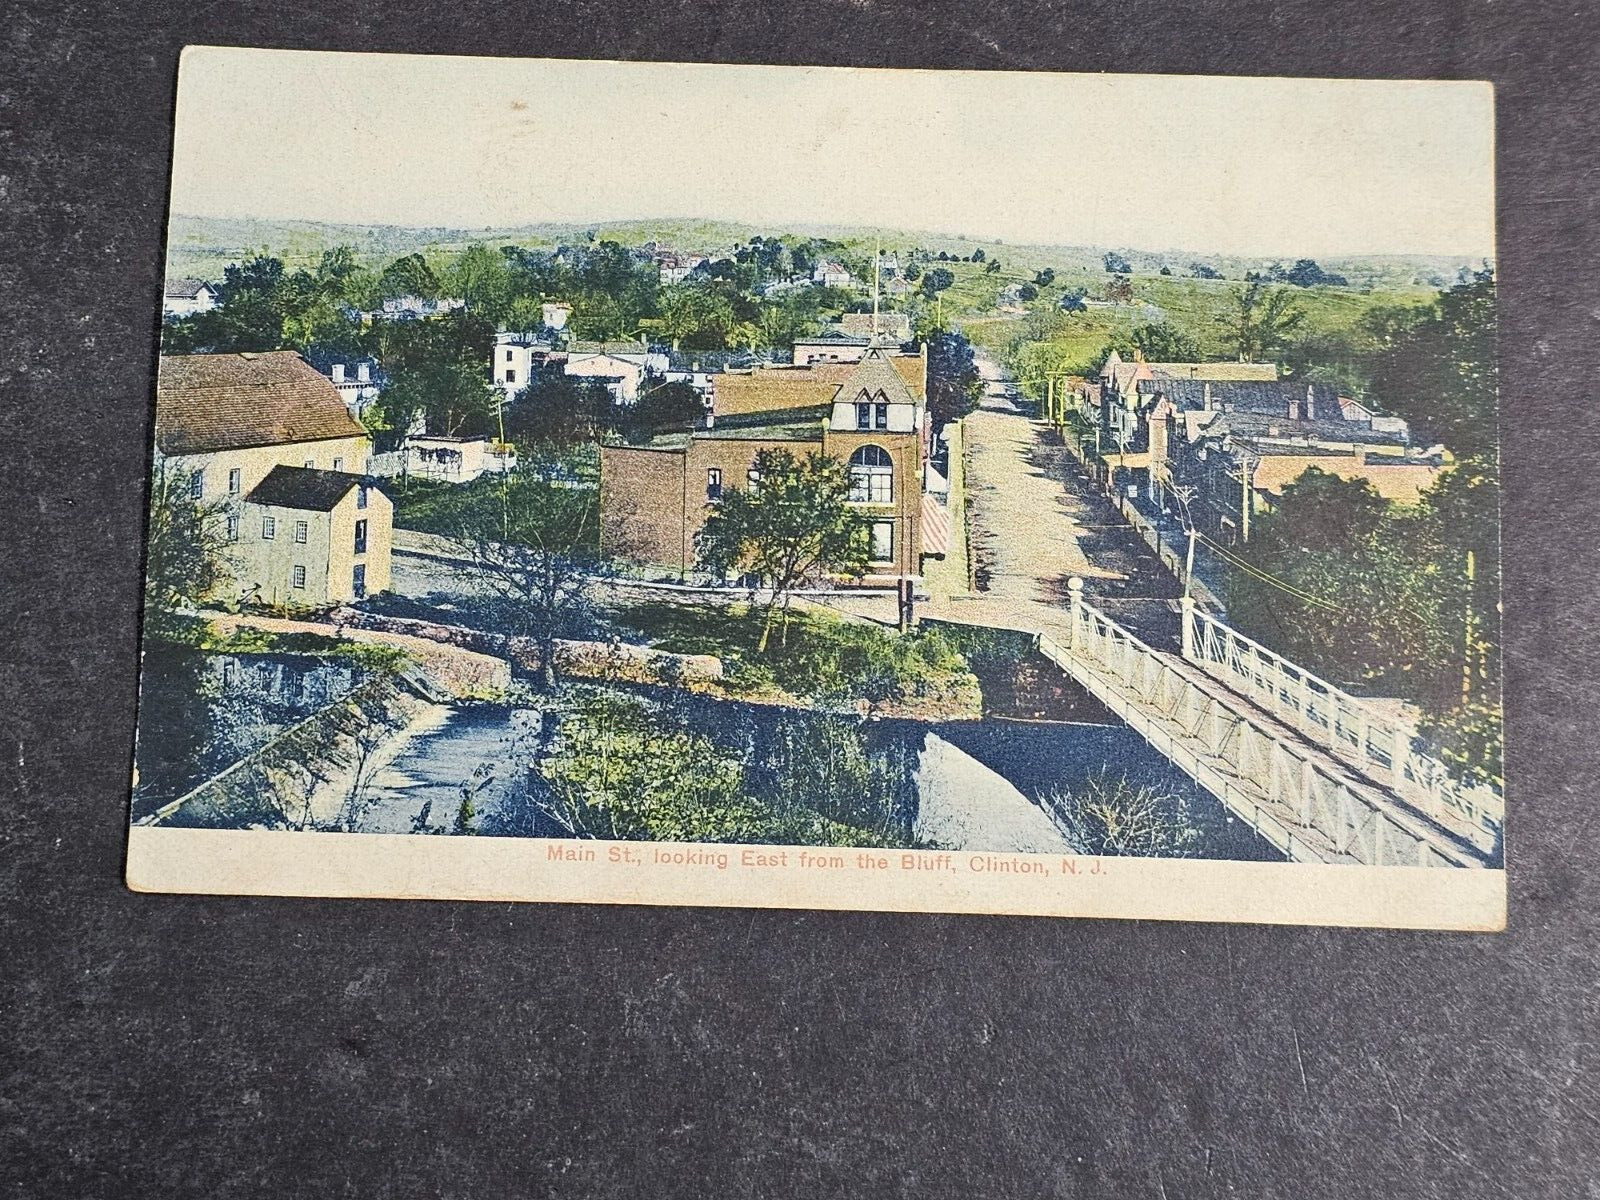 Early 1900s 3x5 postcard of clinton N.J. color litho.